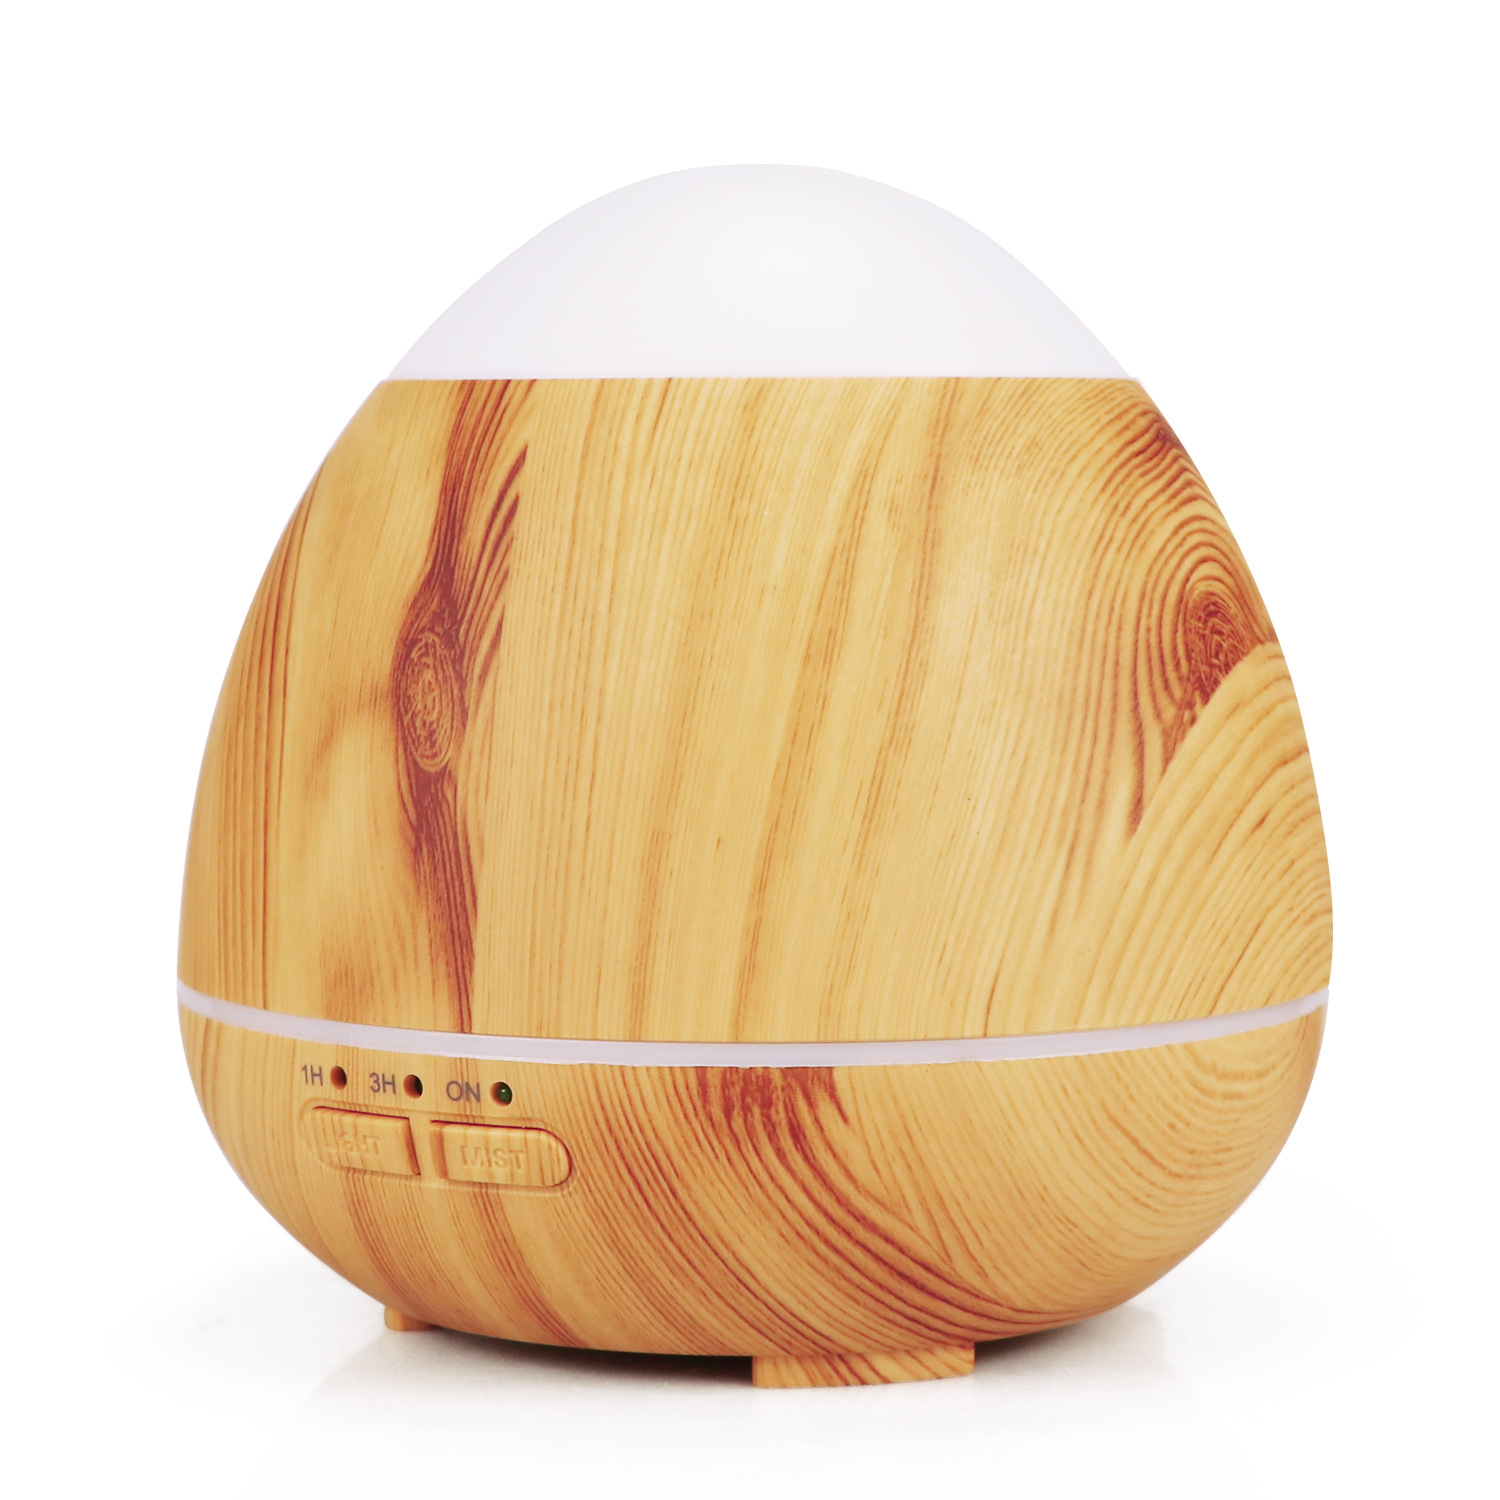 LED Essential Oil Diffuser Ultrasonic Aroma Diffuser Cool Mist 250ml Humidifier